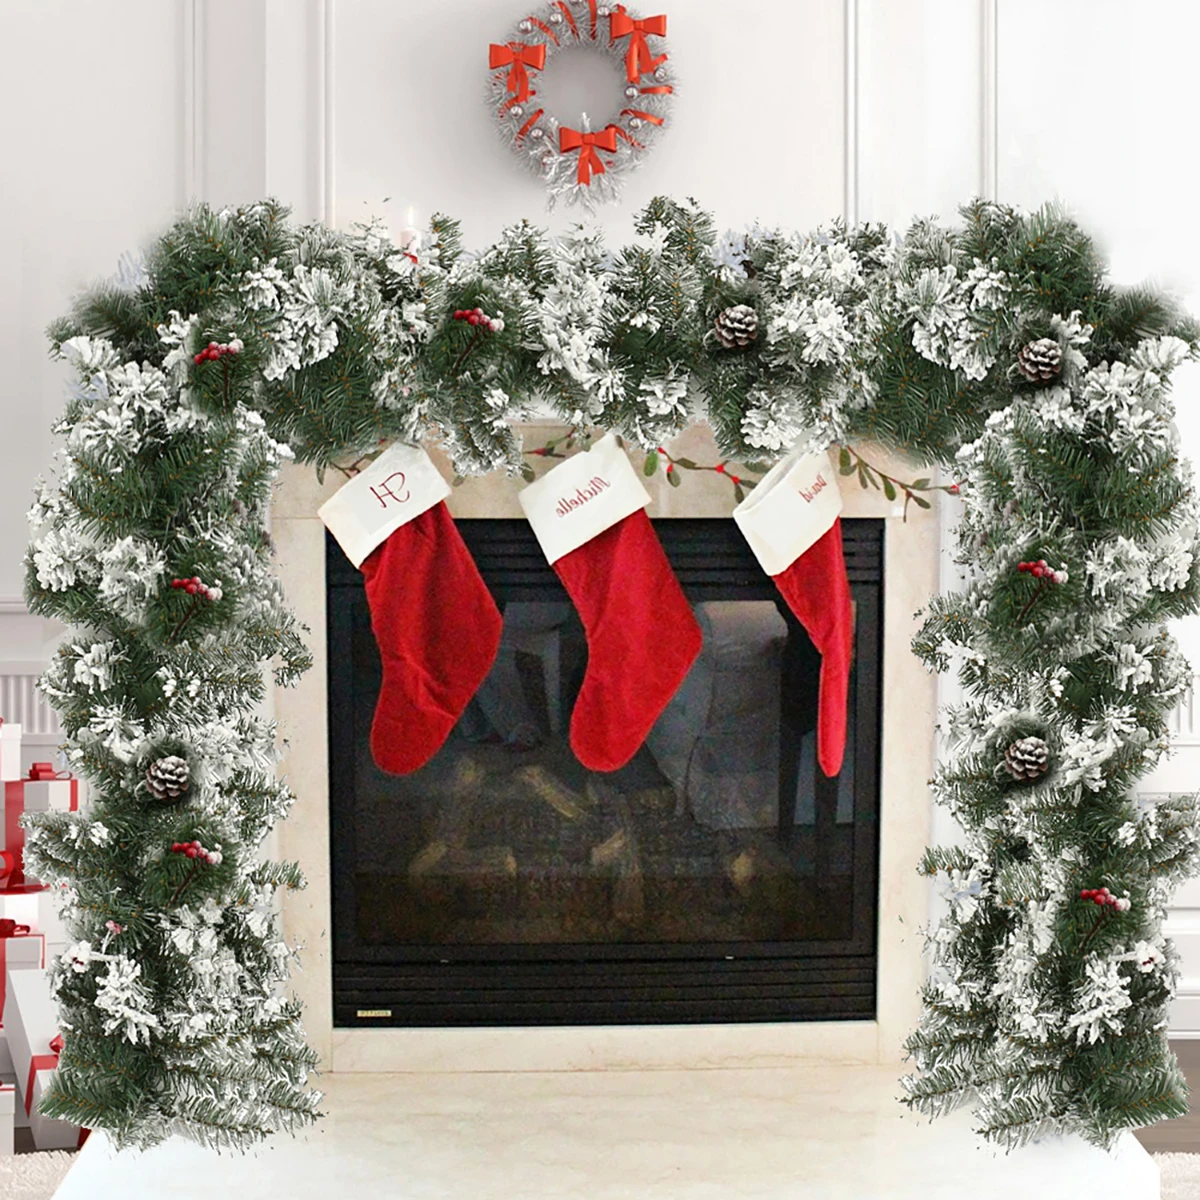 2.7M Christmas Garland Artificial Snow Frosted Christmas Wreath Xmas Home Party Decoration Wall Window Rattan Hanging Ornament